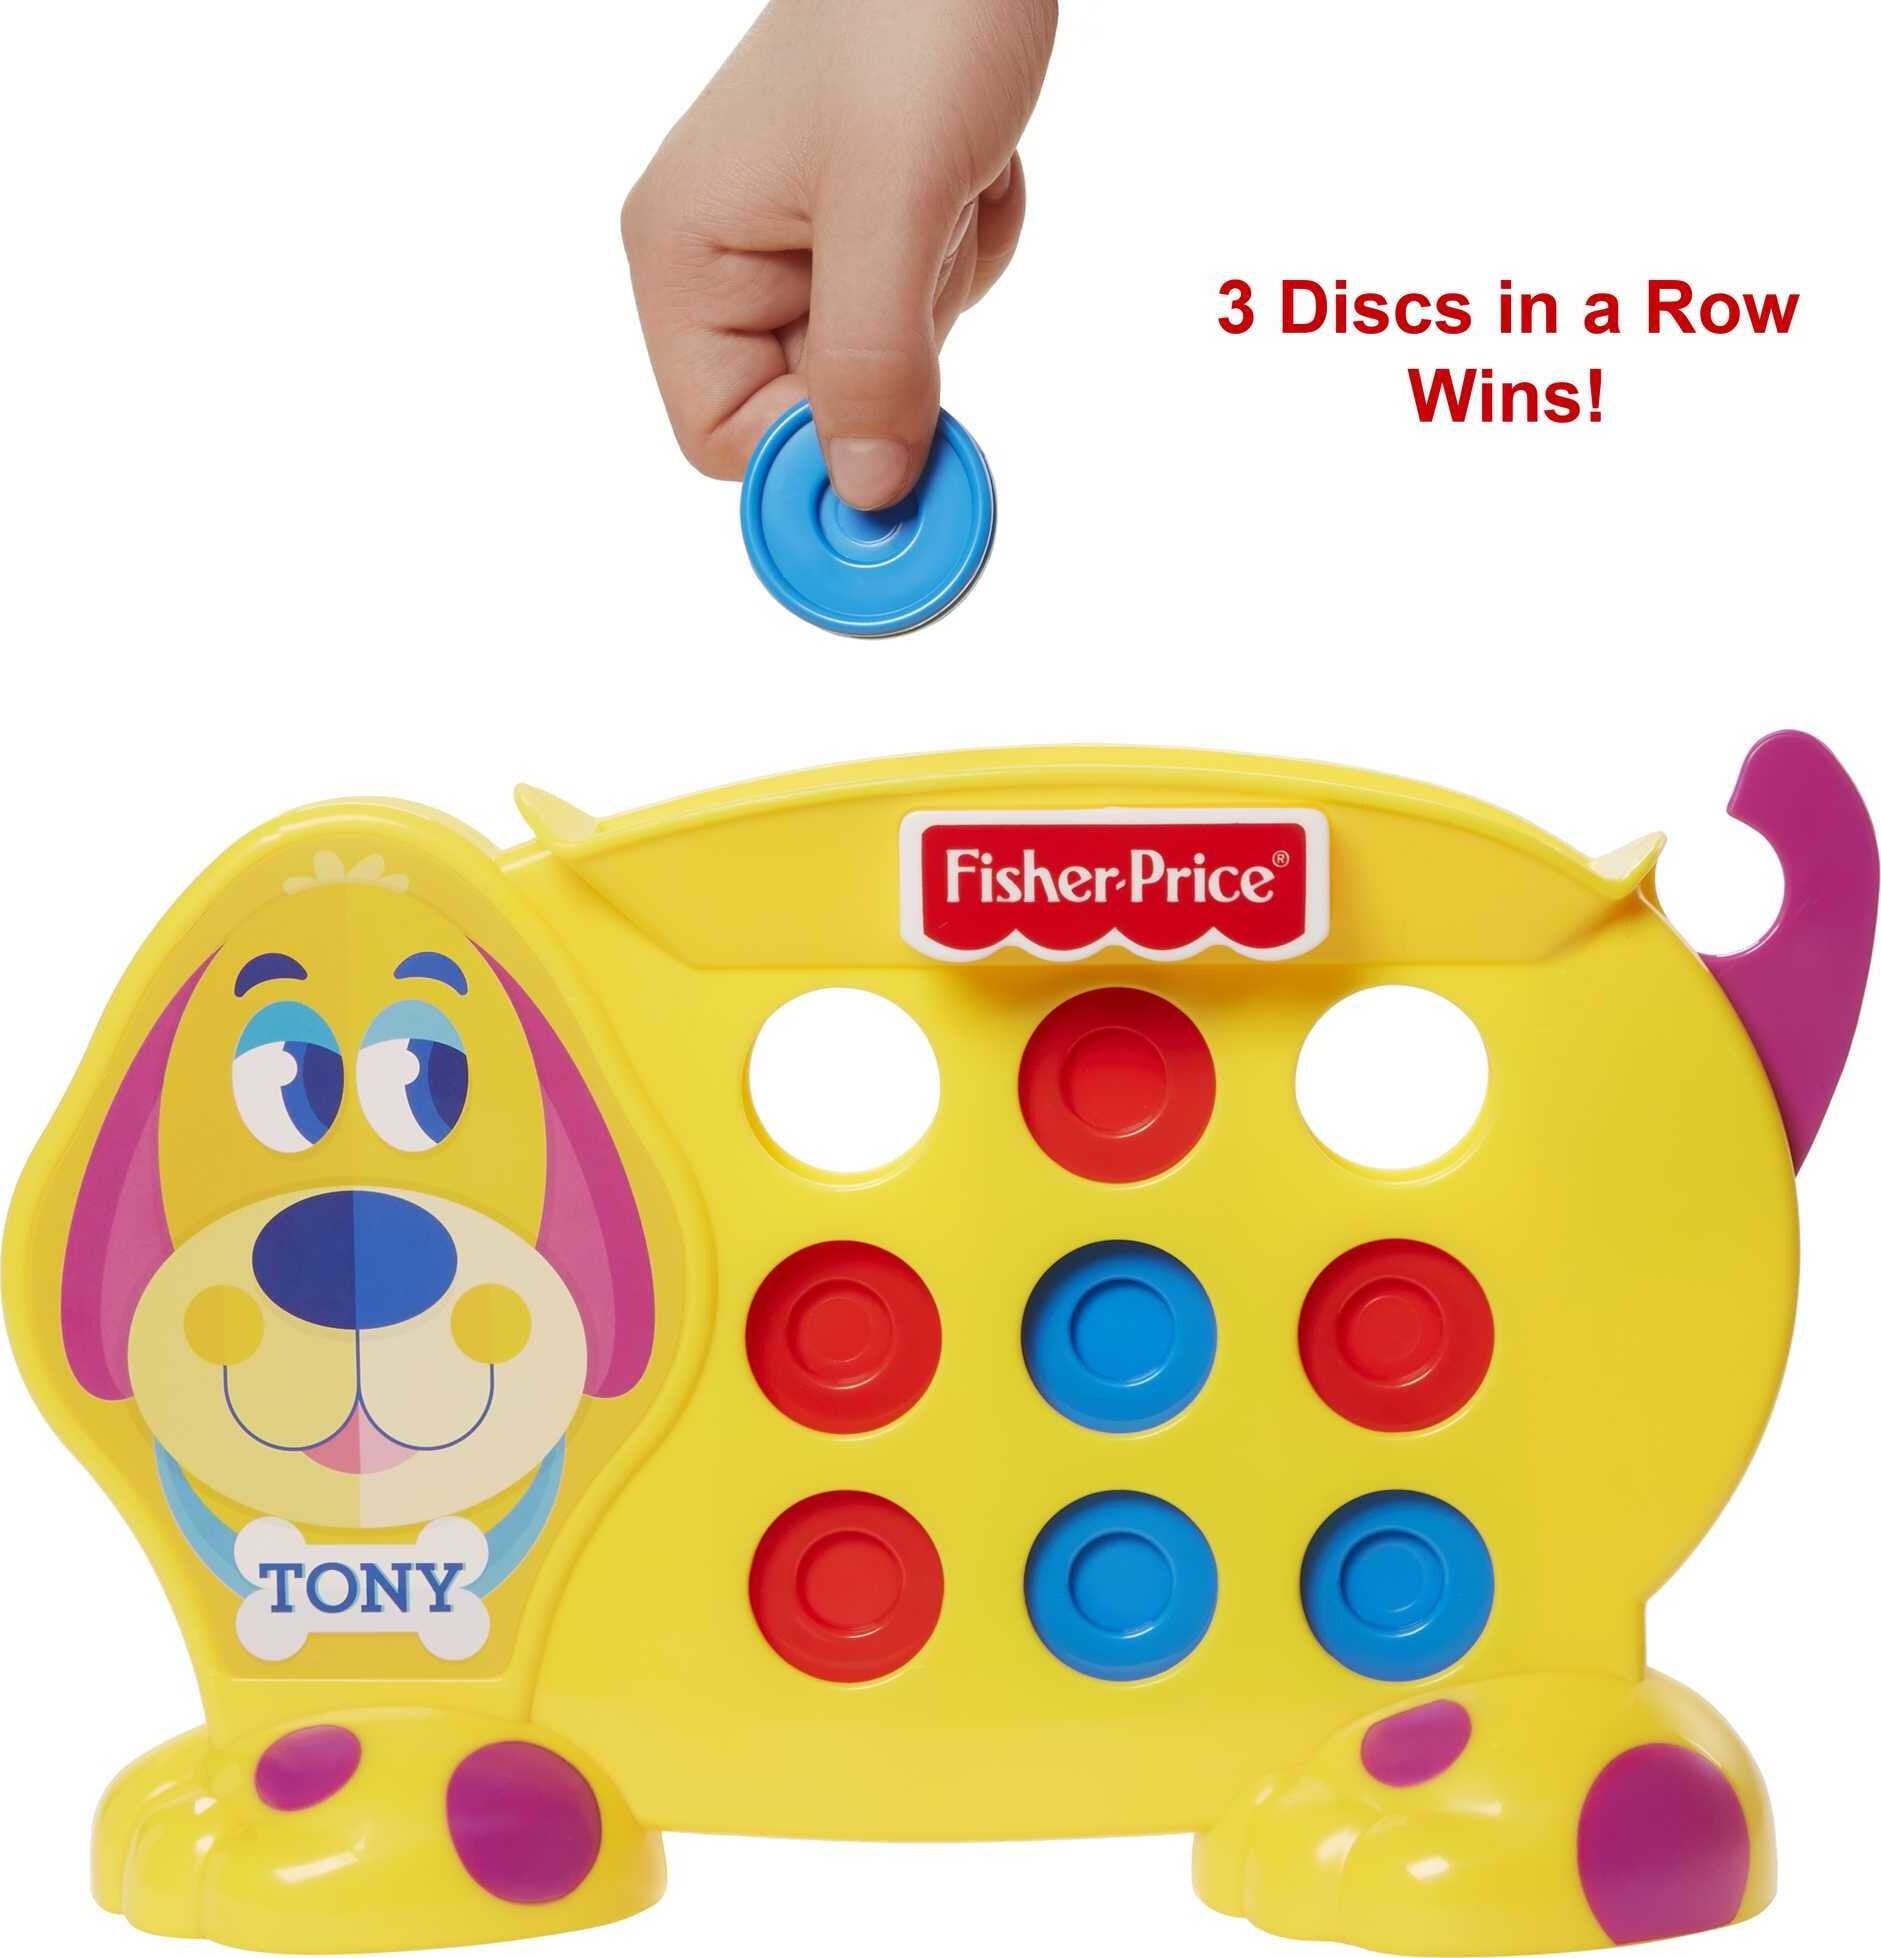 Fisher-Price Tic-Tac-Tony Pre-School Kids Game, Get Three-in-a-Row with  Plastic Discs